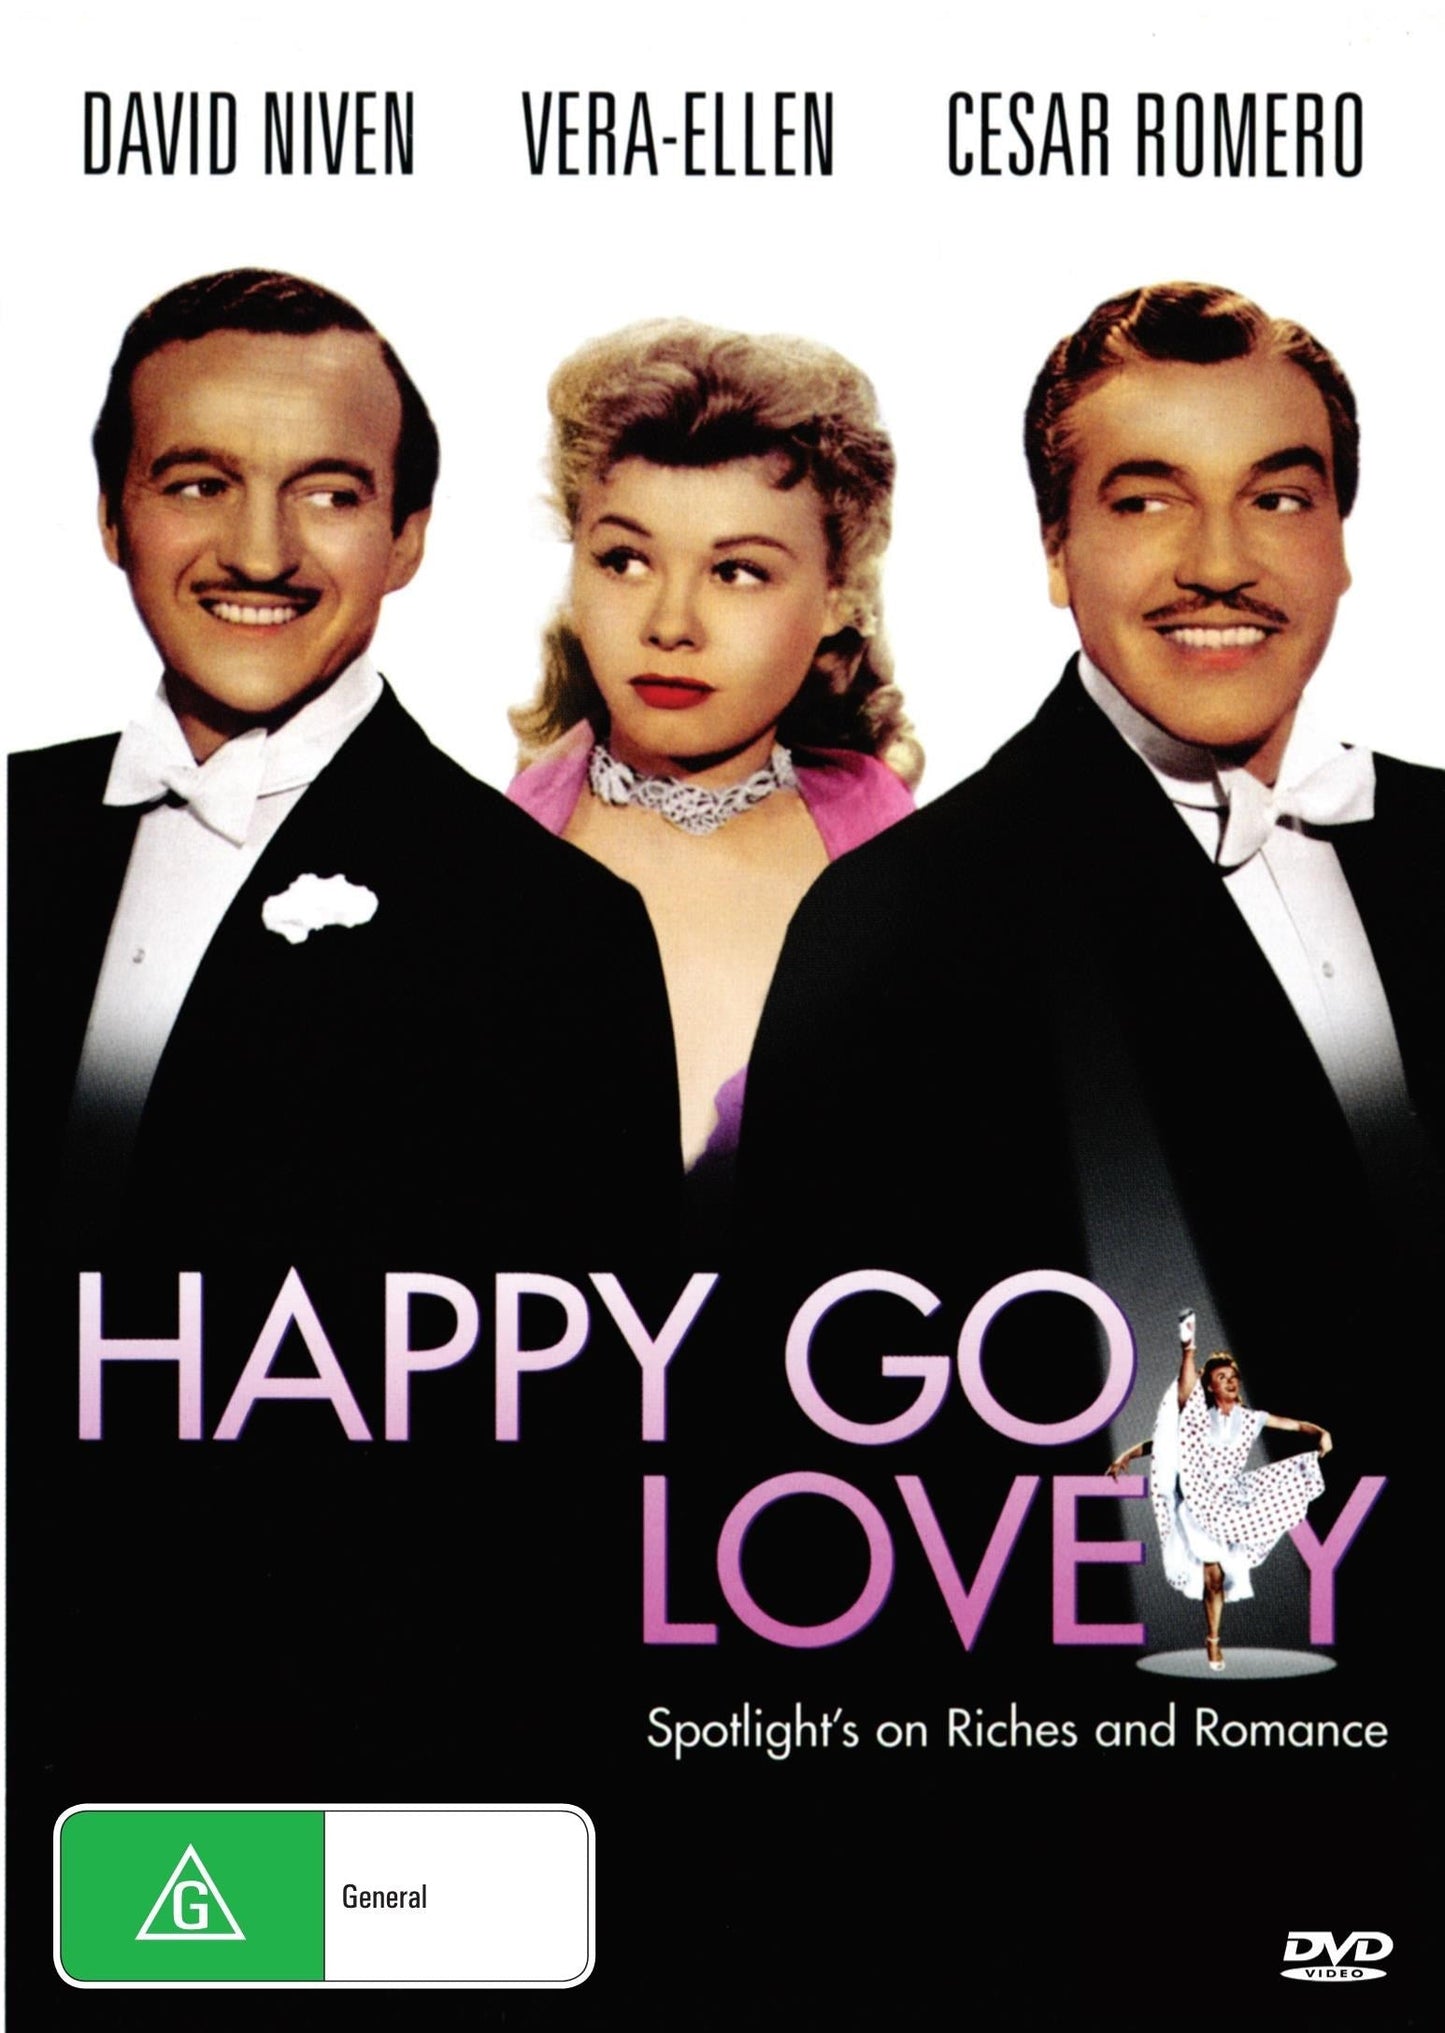 Happy Go Lovely rareandcollectibledvds